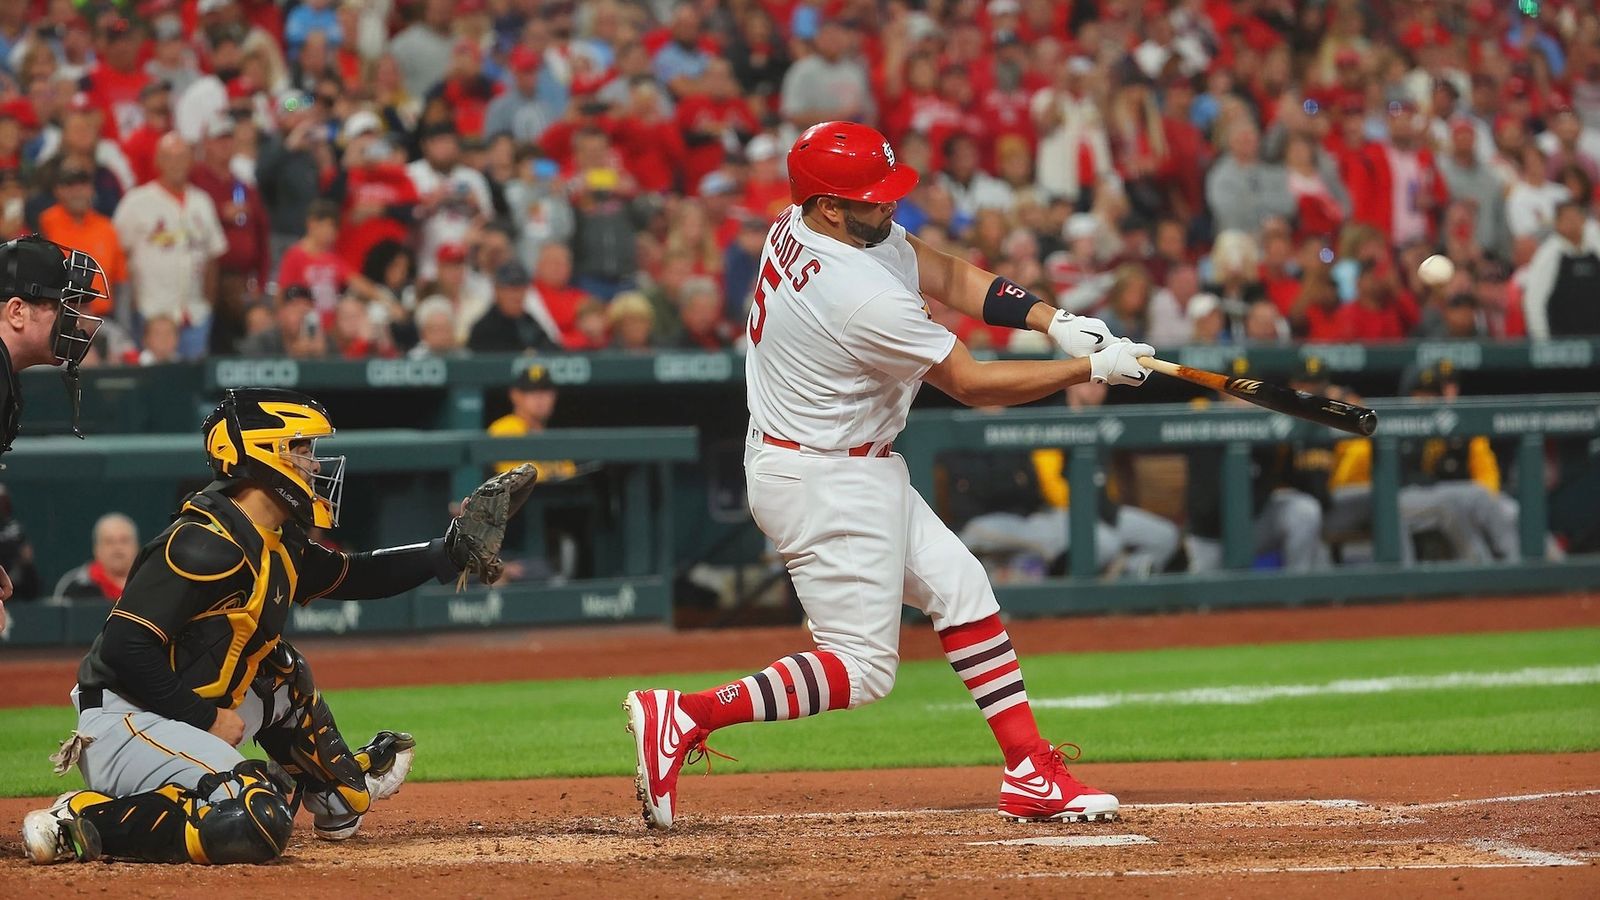 After decades of torment, Albert Pujols' last home run(s) will be against  Pirates